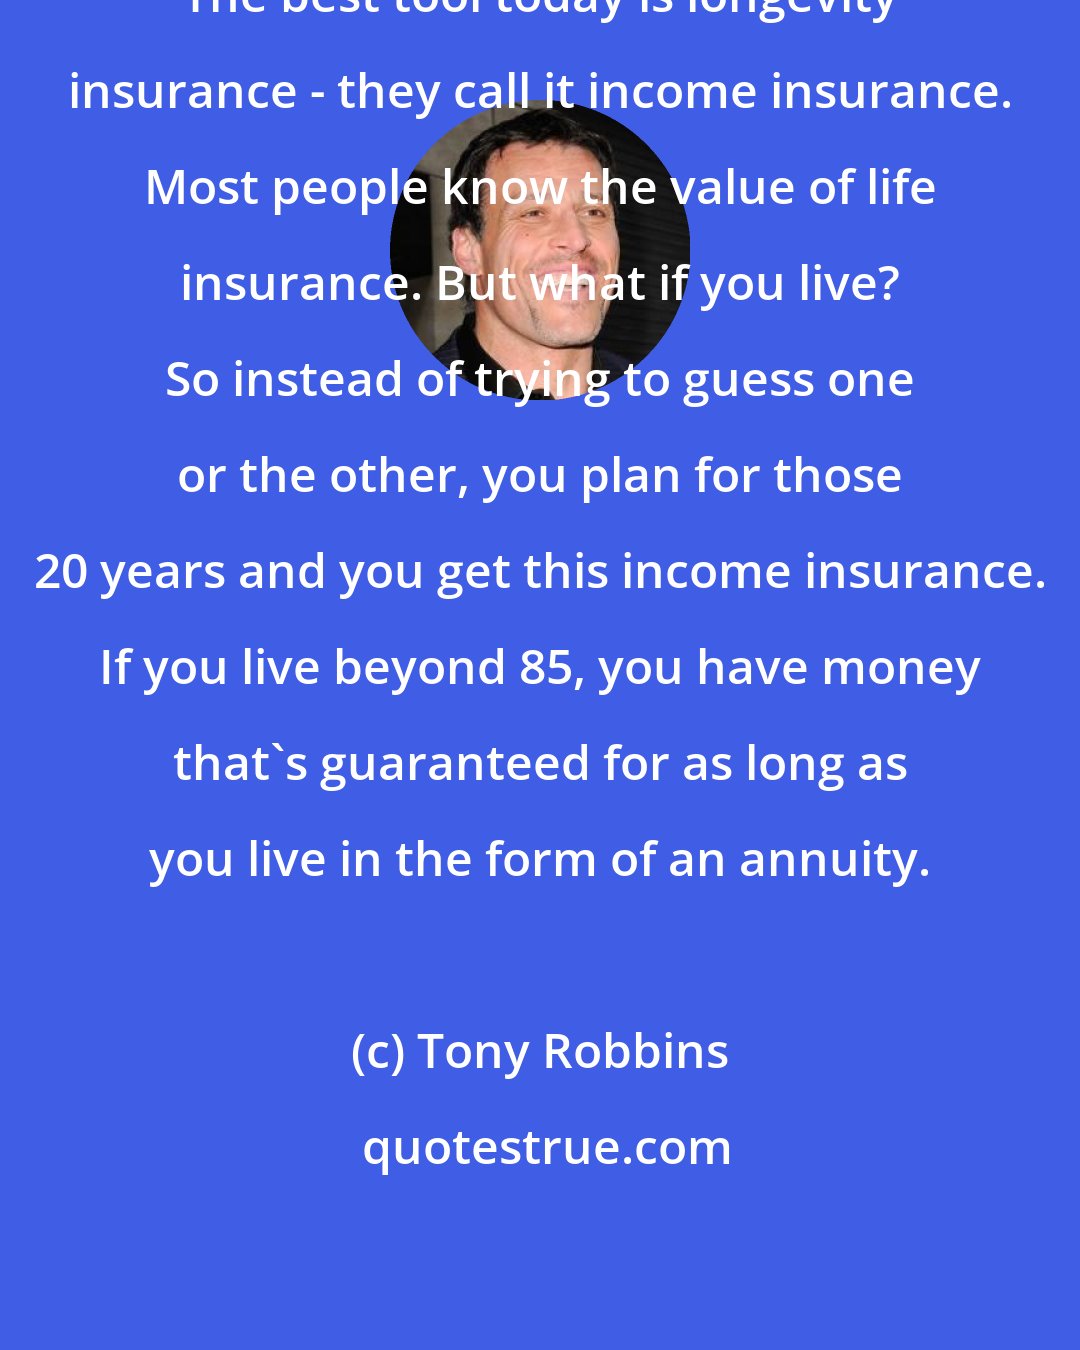 Tony Robbins: The best tool today is longevity insurance - they call it income insurance. Most people know the value of life insurance. But what if you live? So instead of trying to guess one or the other, you plan for those 20 years and you get this income insurance. If you live beyond 85, you have money that's guaranteed for as long as you live in the form of an annuity.